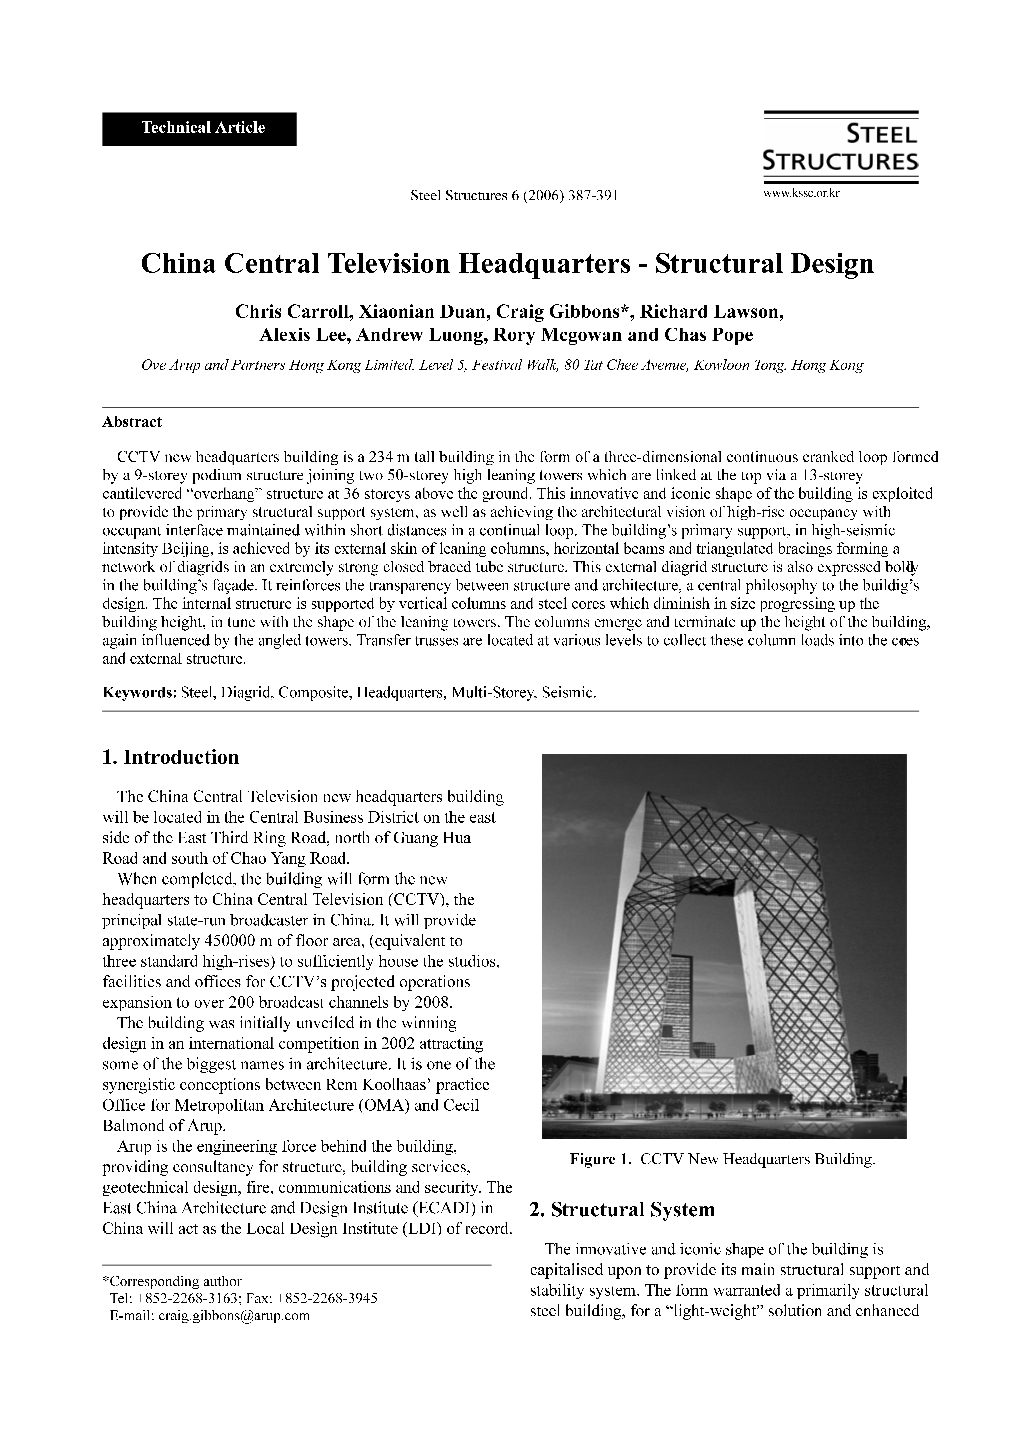 China Central Television Headquarters - Structural Design